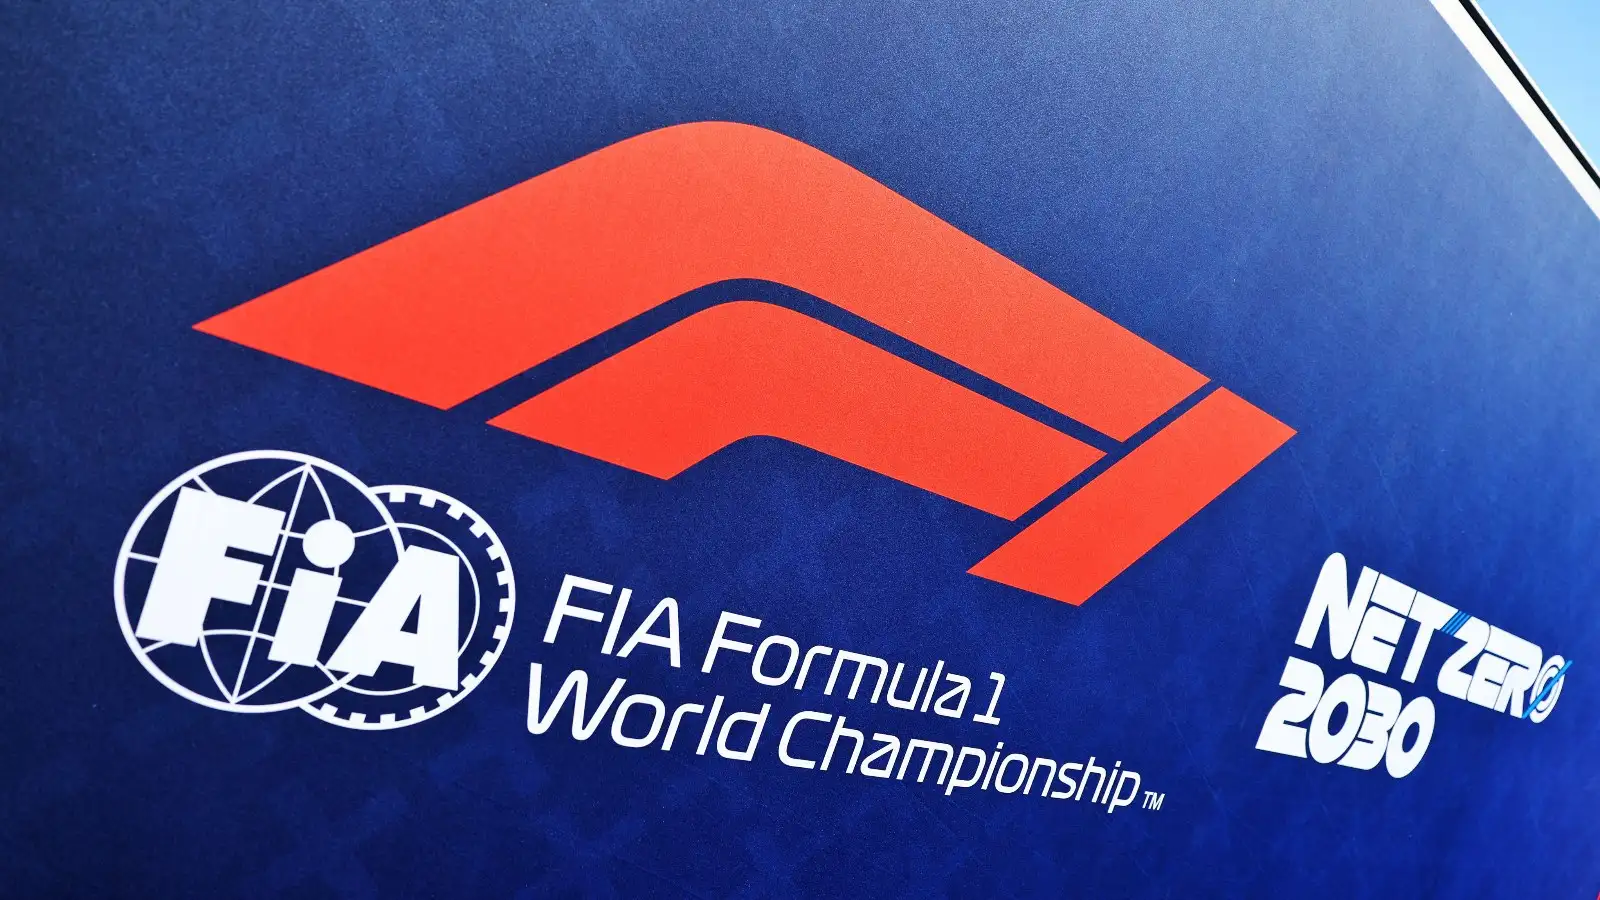 The F1 logo on a blue background.